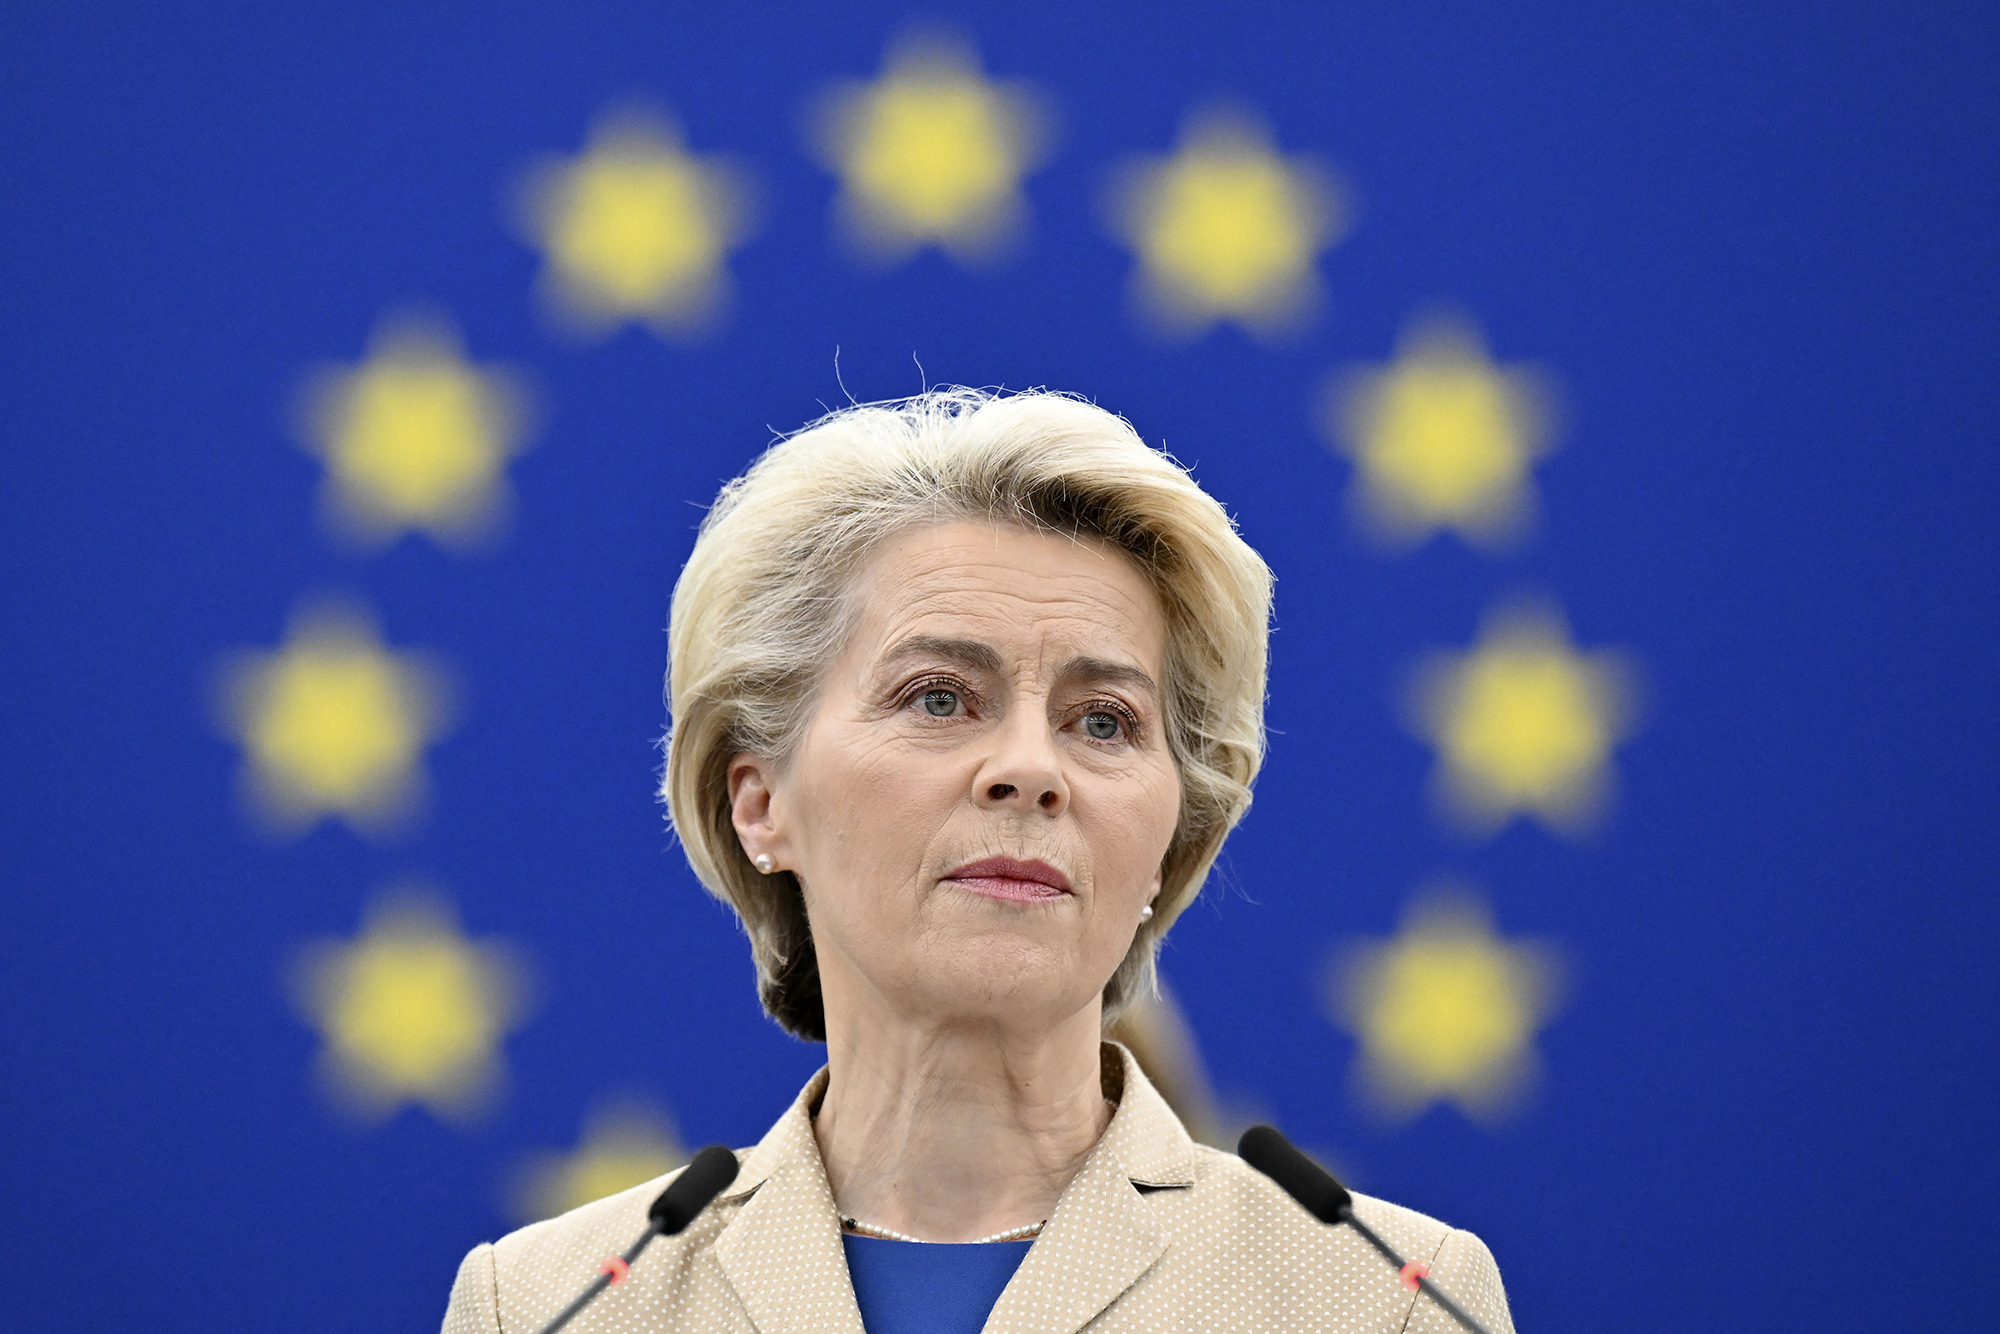 European Commission President Ursula von der Leyen speaks during a debate on the results of the war of aggression by Russia against Ukraine as part of a plenary session at the European Parliament in Strasbourg, eastern France, on February 15. 